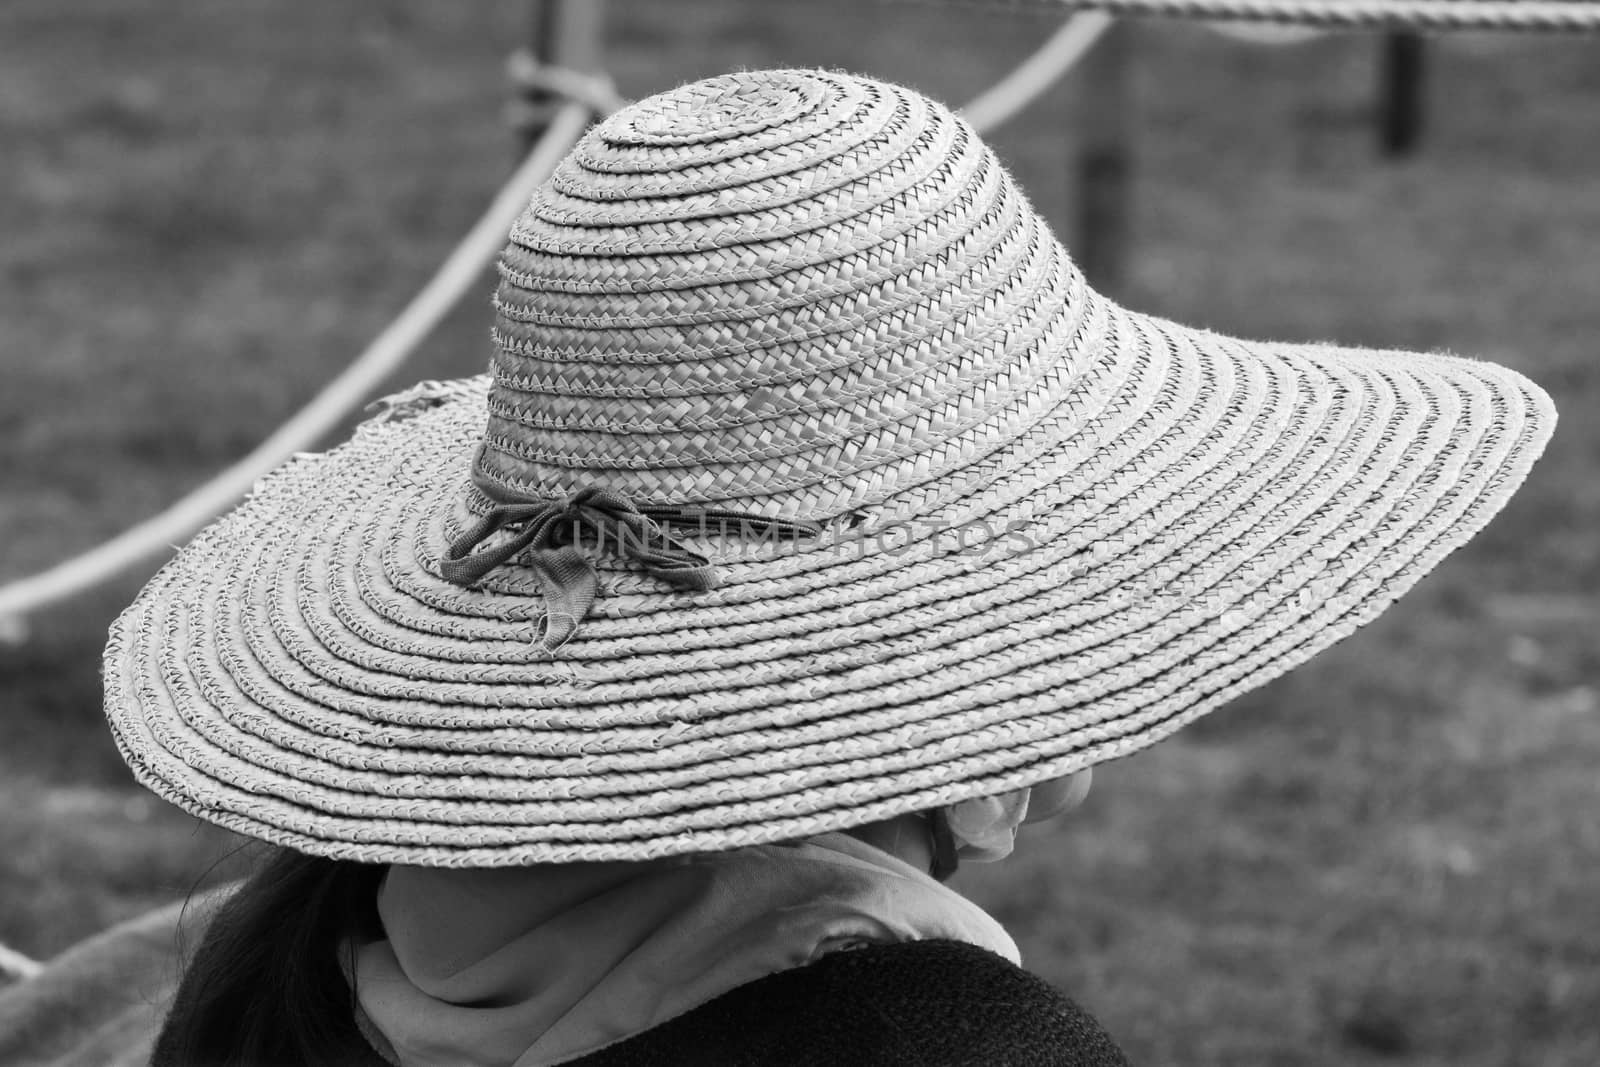 Woman wearing a traditional straw hat, her face hidden at a Medieval festival - monochrome processing